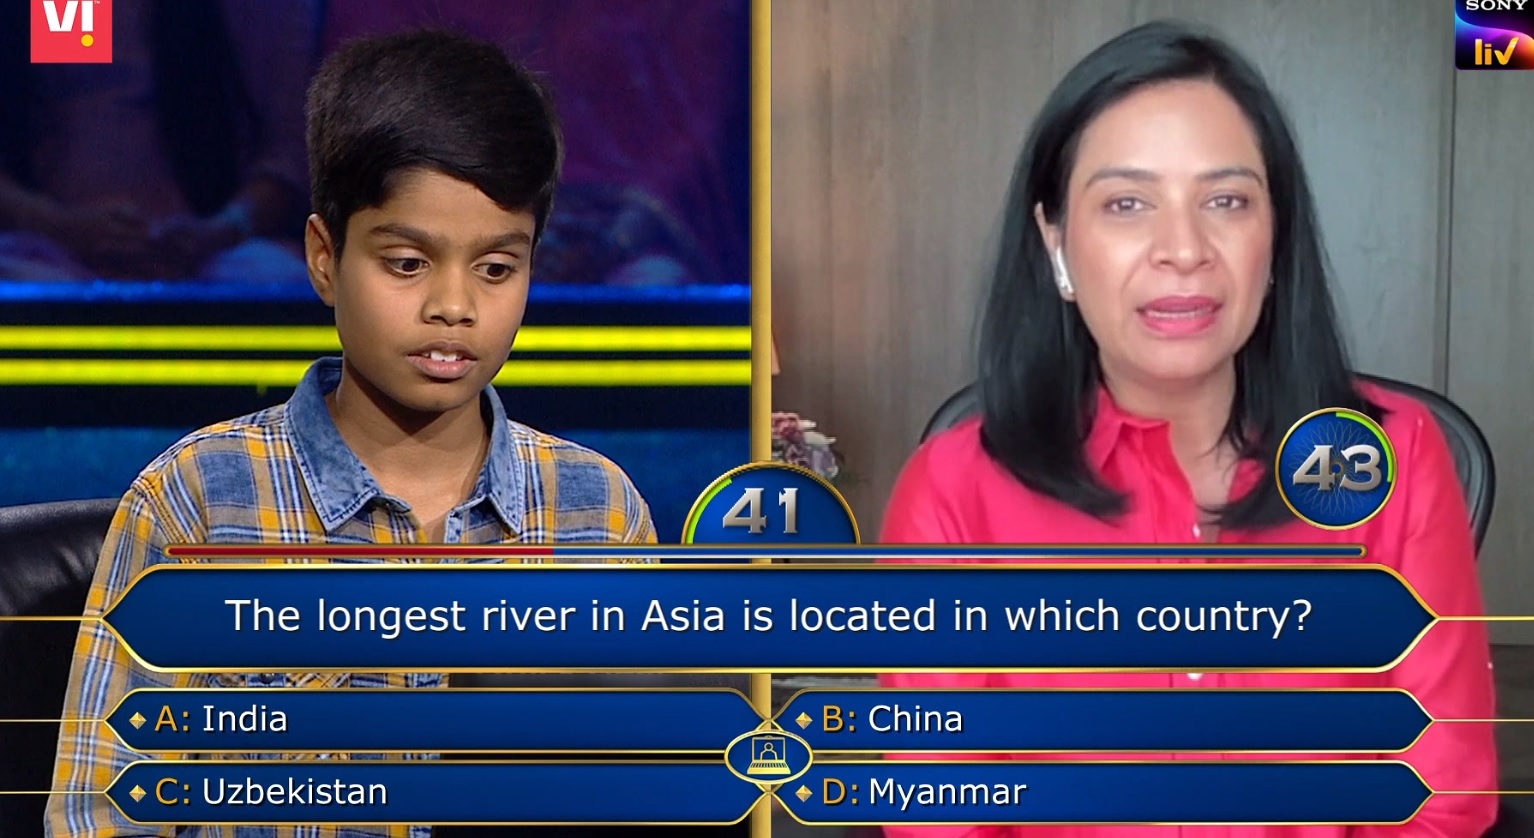 Ques : The longest river in Asia is located in which country?